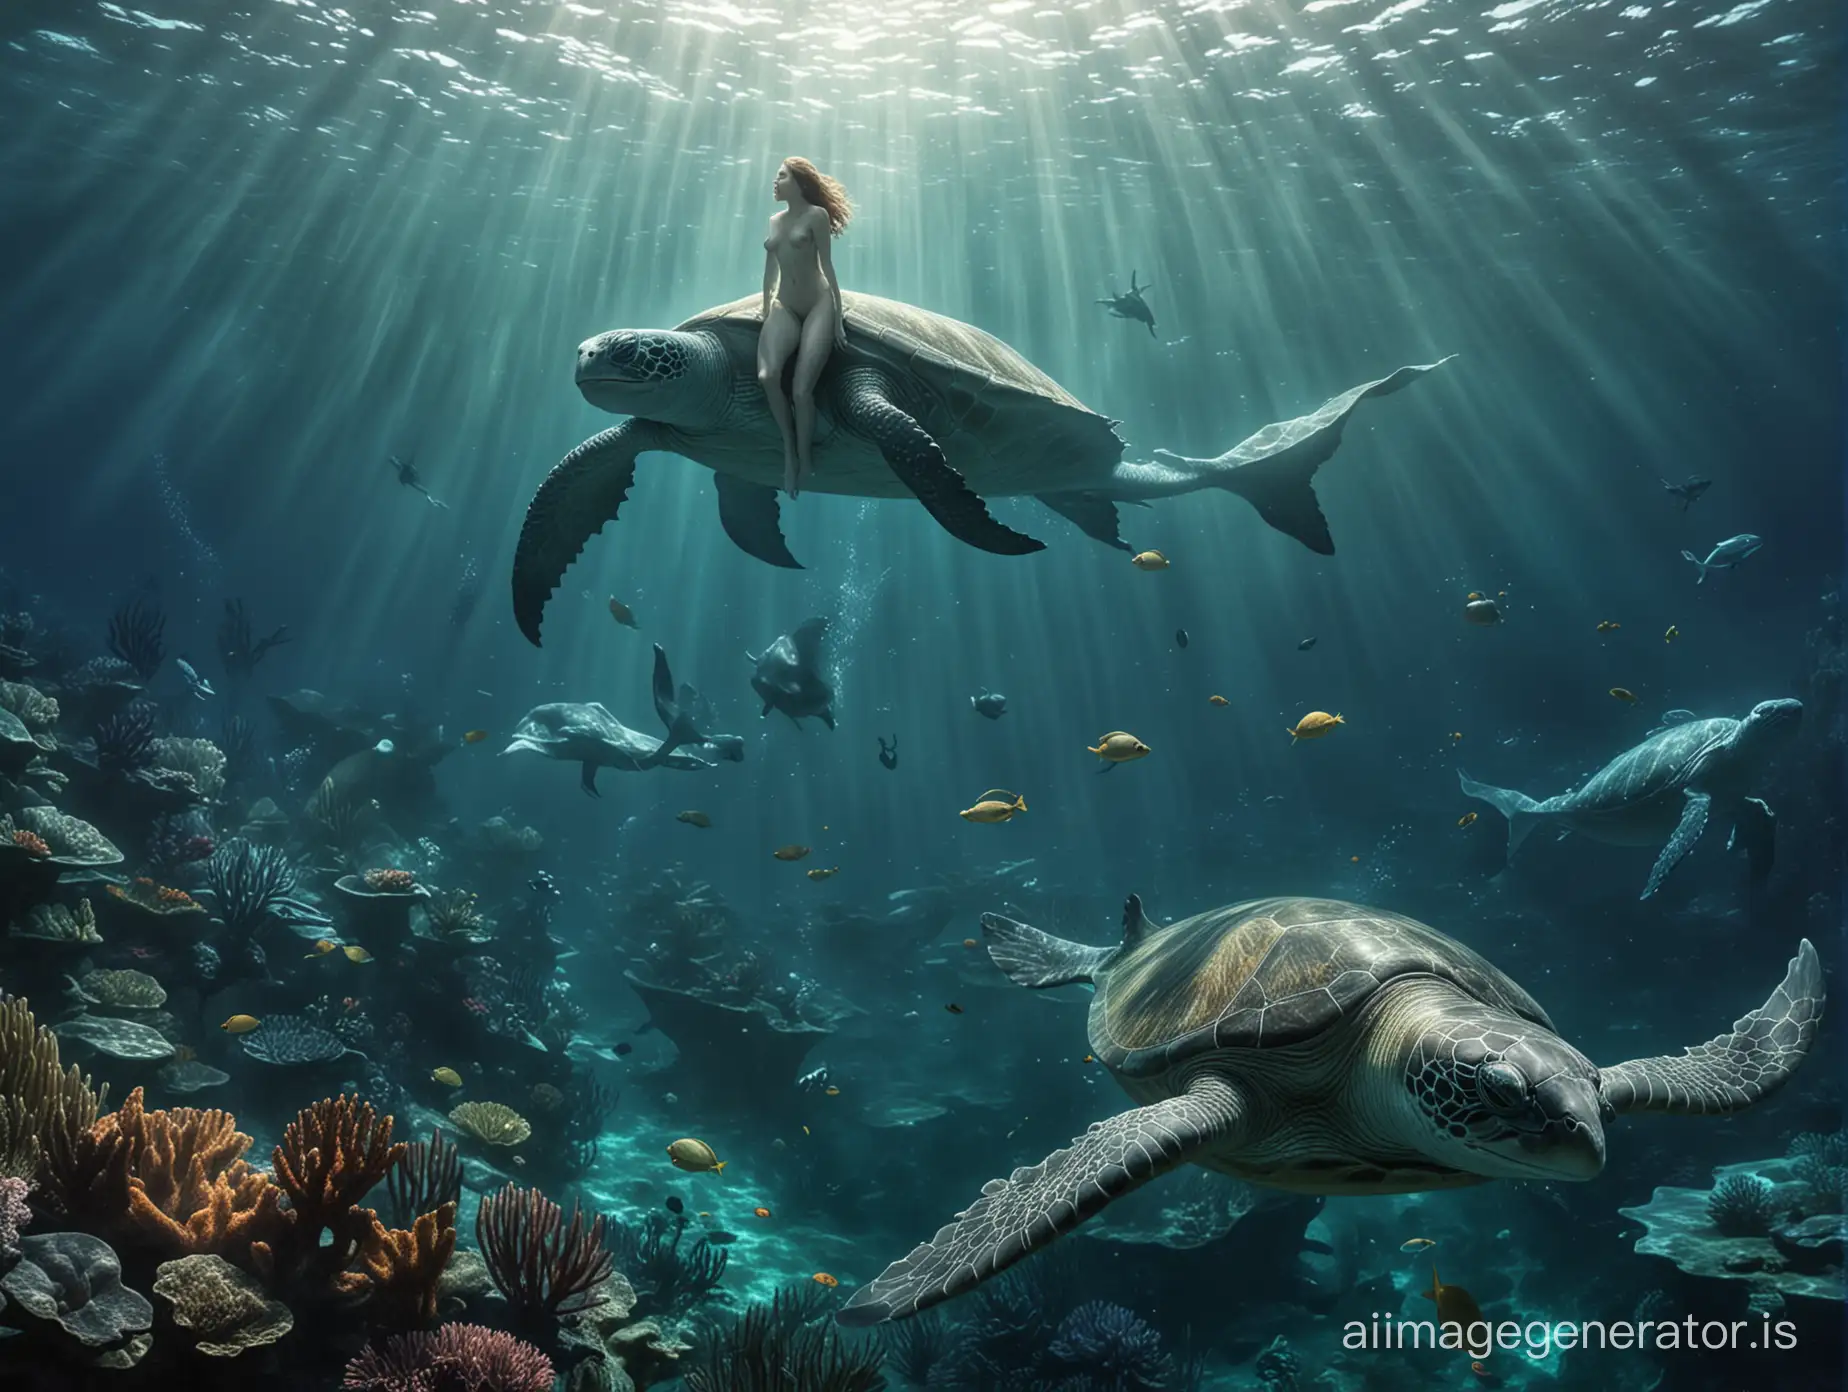 Surreal-Deep-Sea-Scene-with-Naked-Girl-and-Mermaids